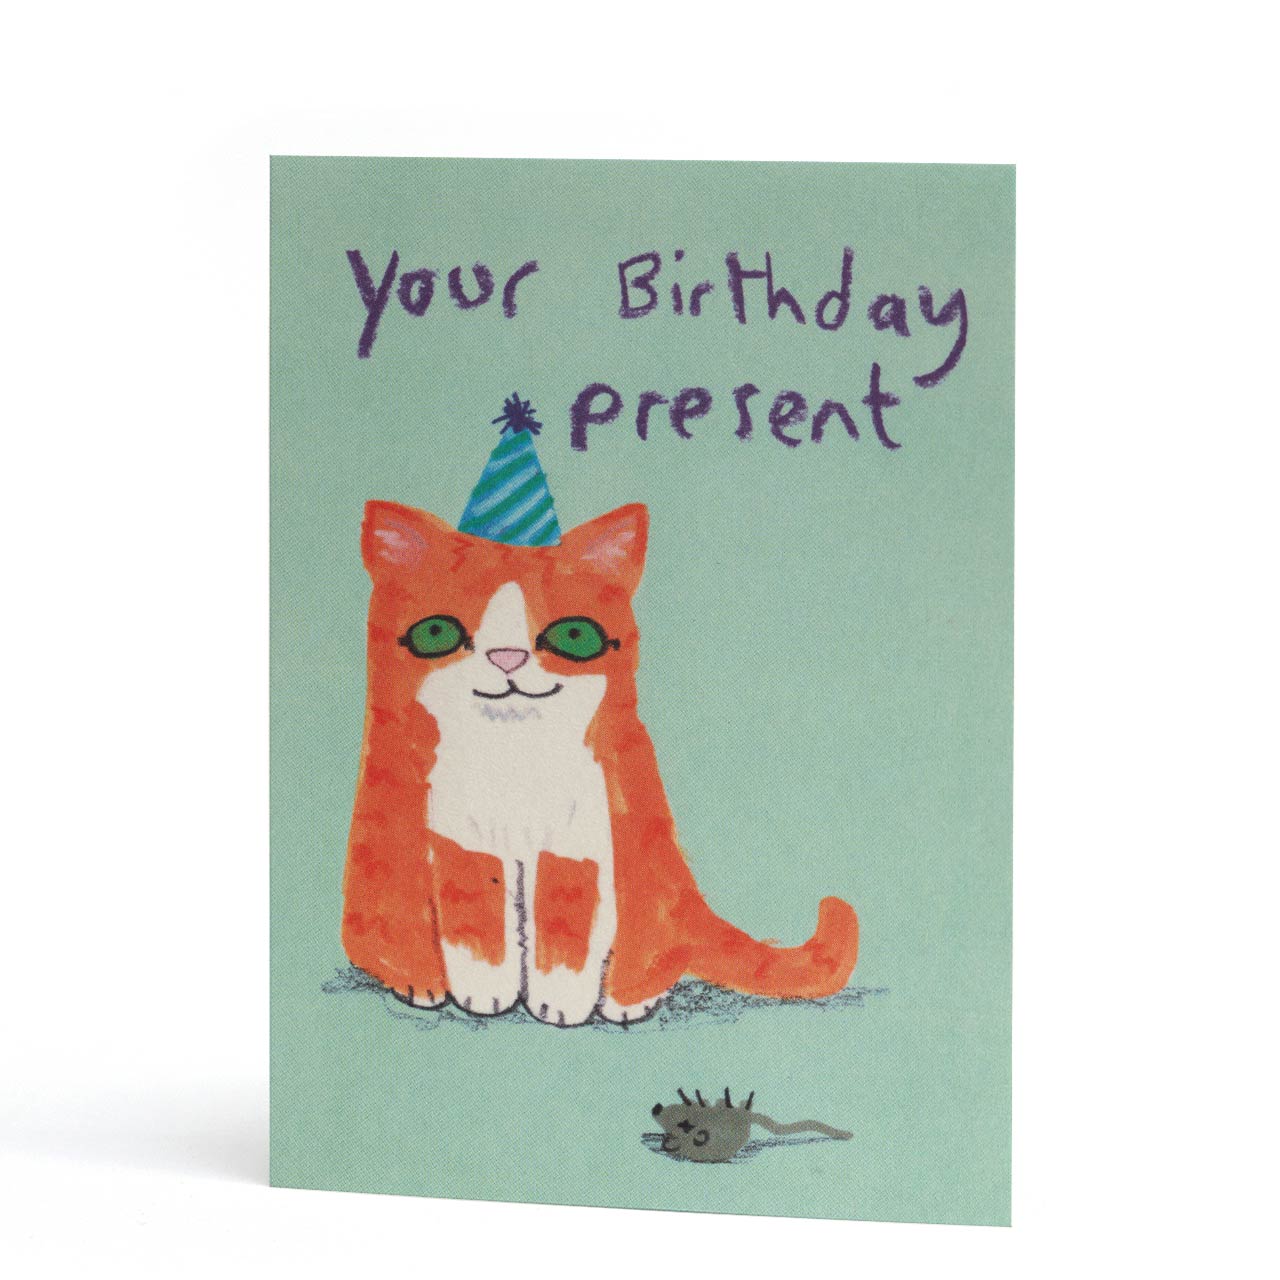 Your Birthday Present Ginger Cat Greeting Card